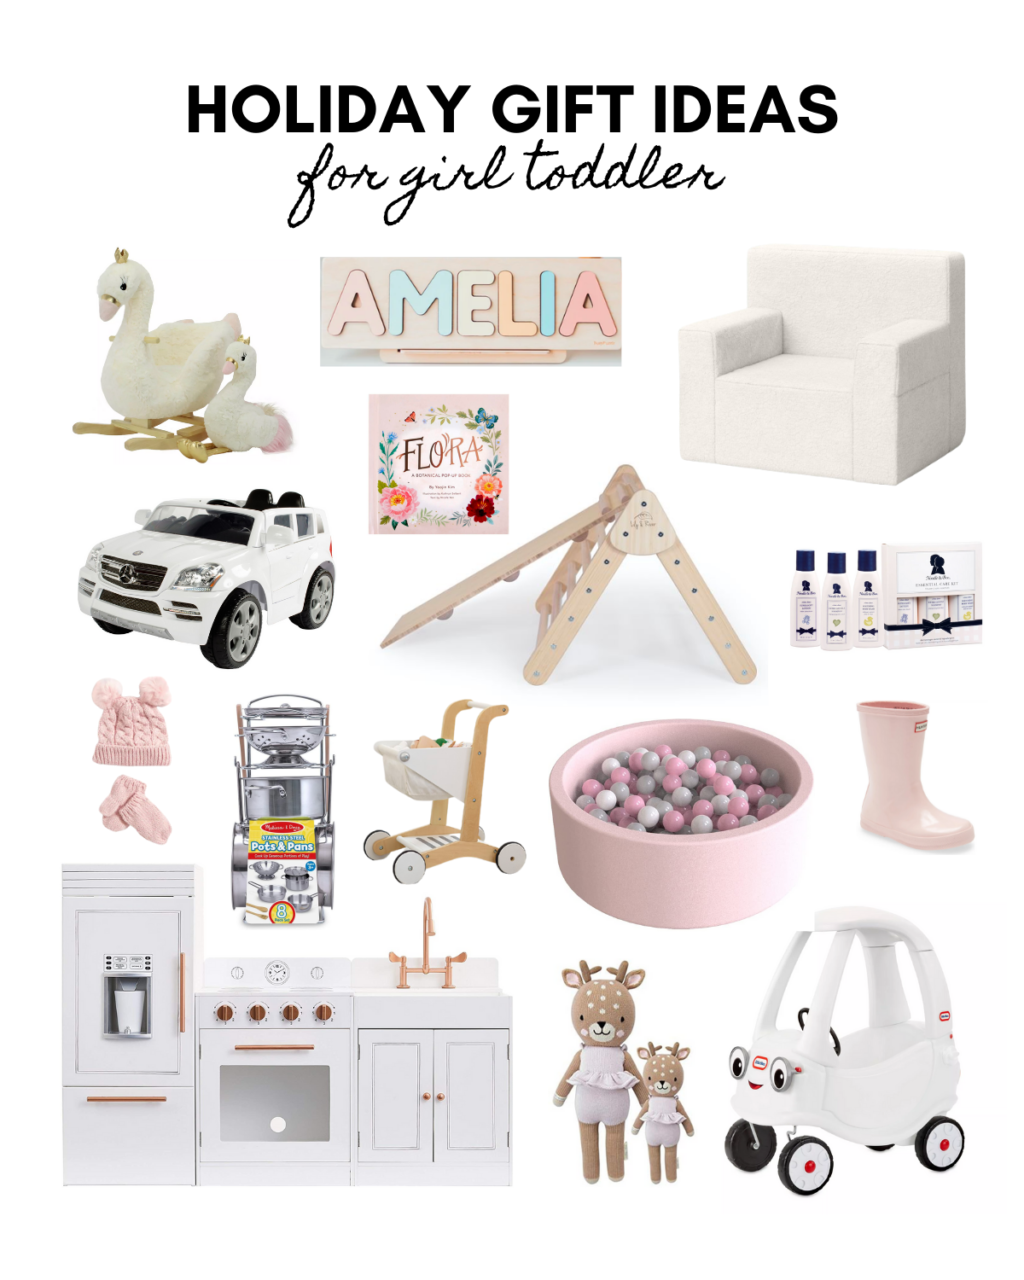 Holiday gift ideas for girl toddlers ages 1 to 2 years old, cute and pretty Christmas gift ideas for babies